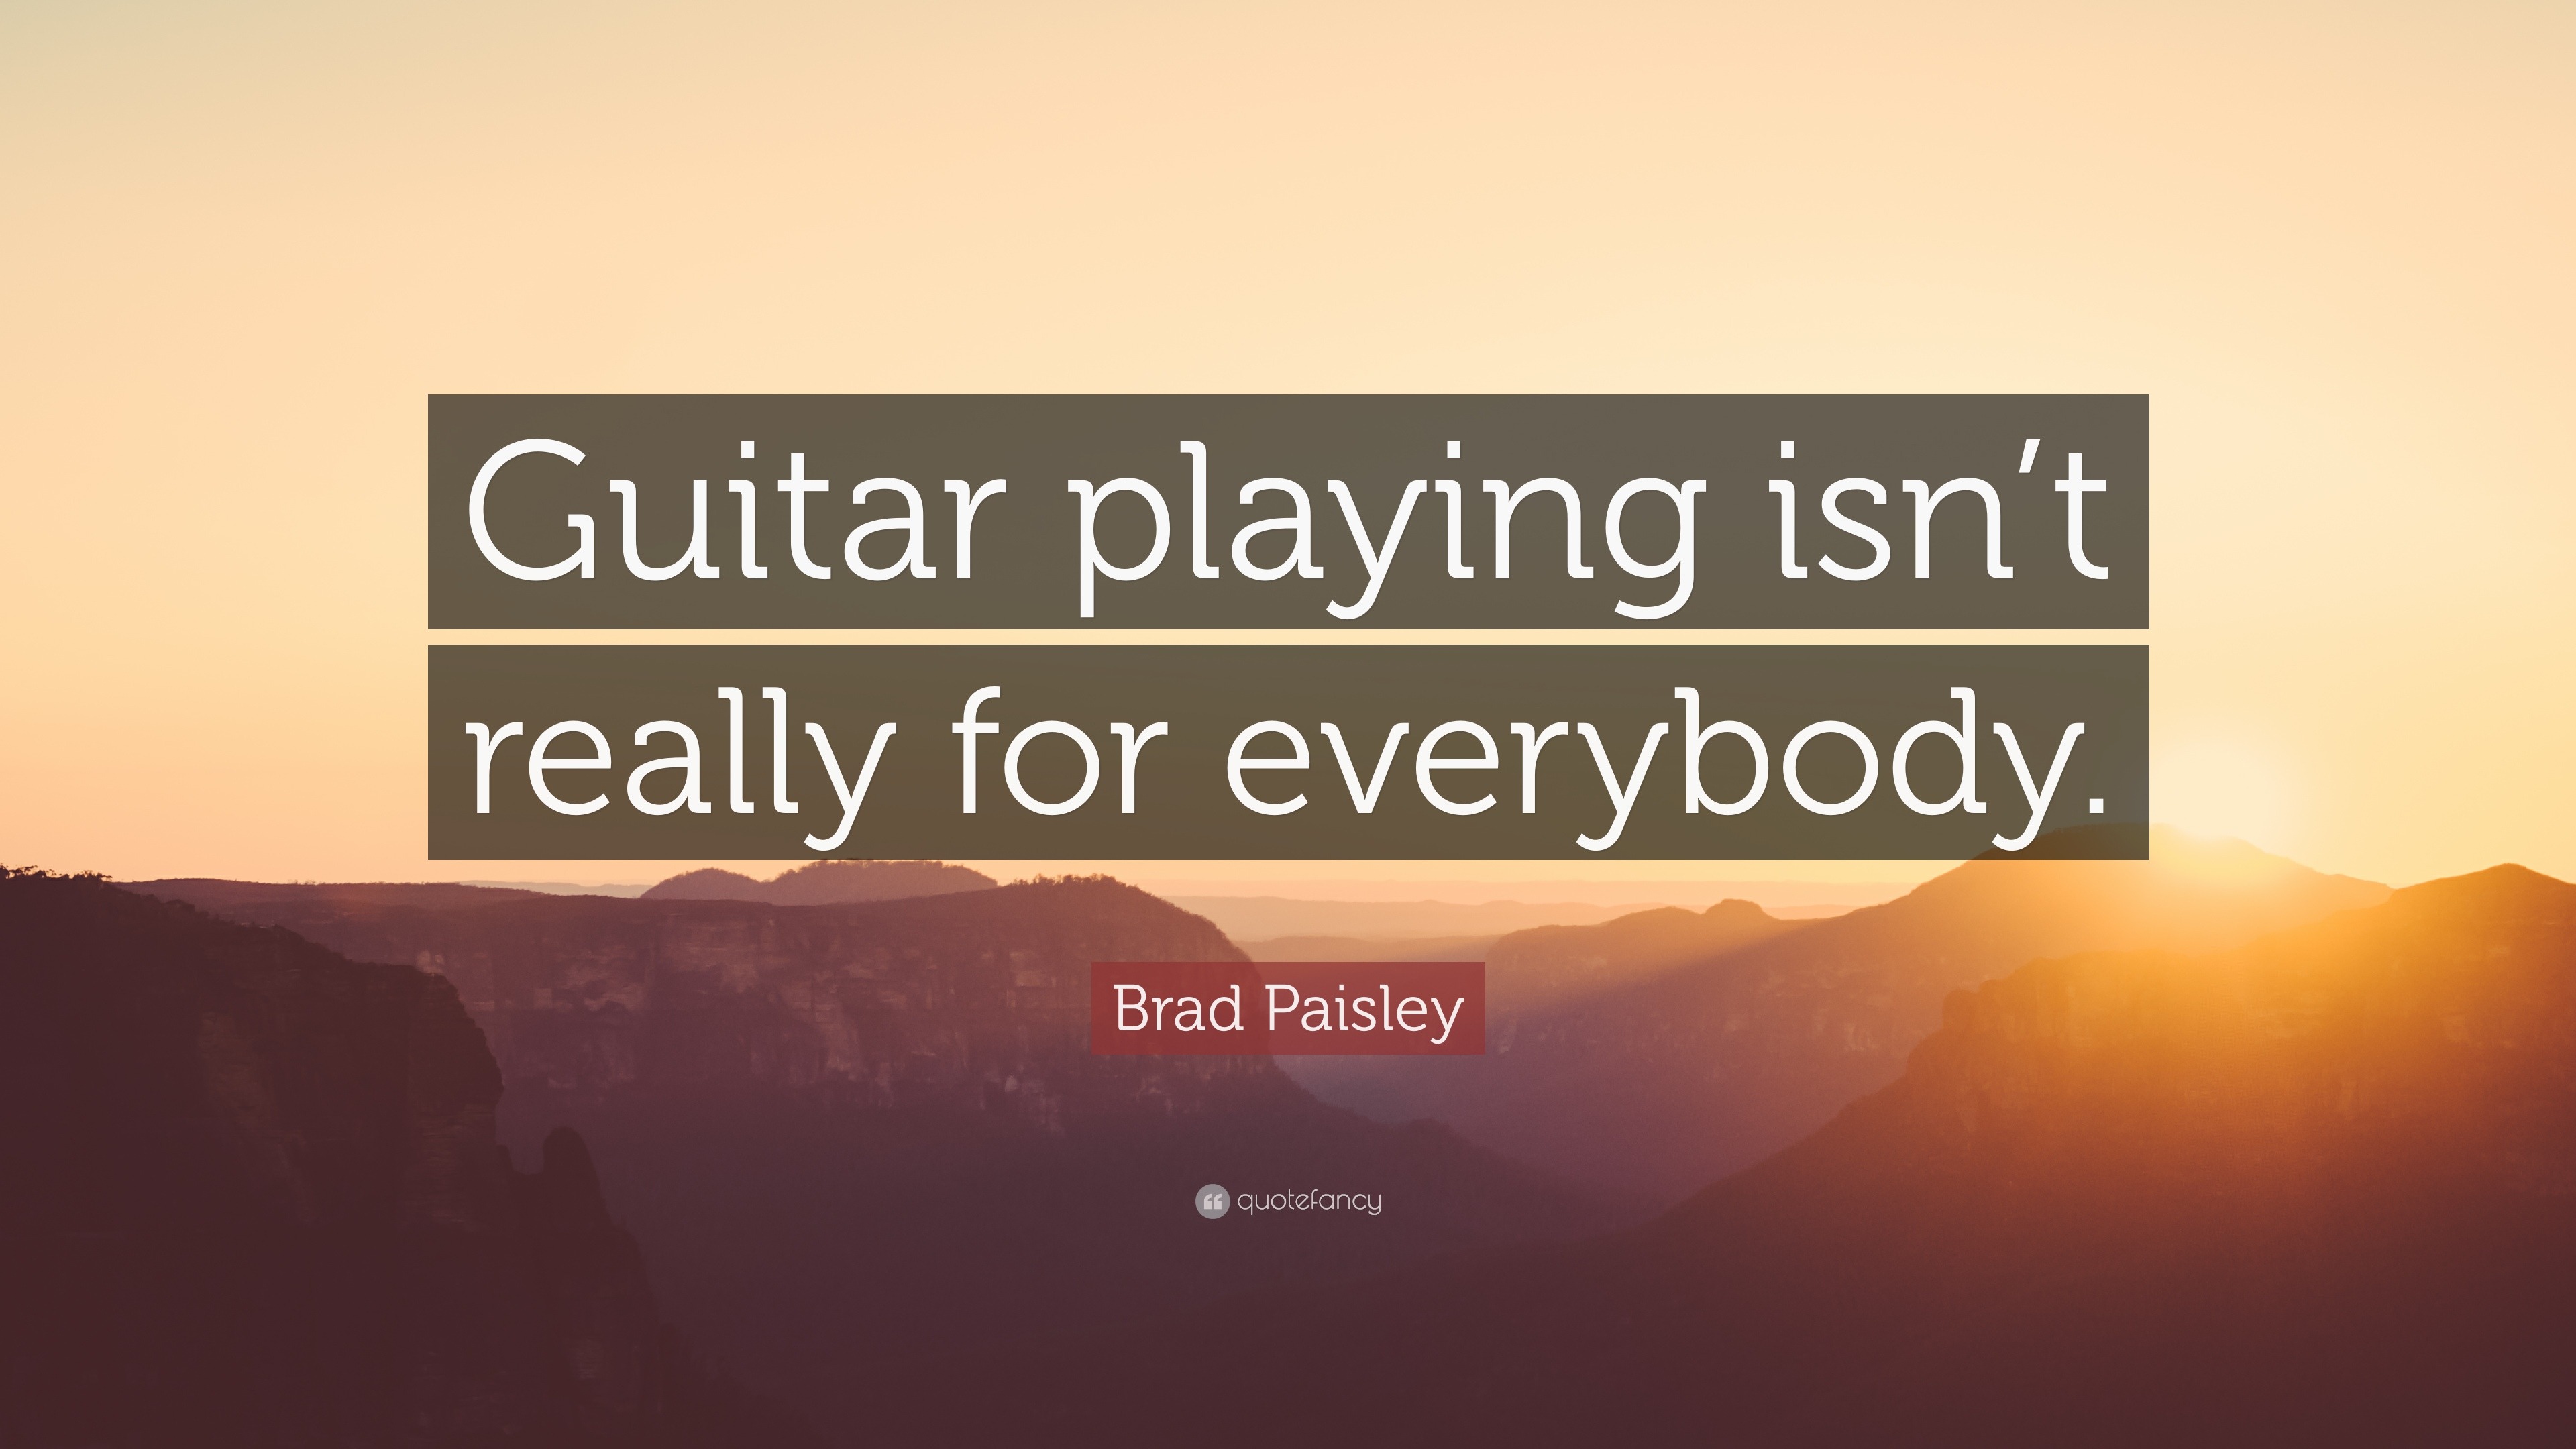 Brad Paisley Quotes (44 wallpapers) - Quotefancy